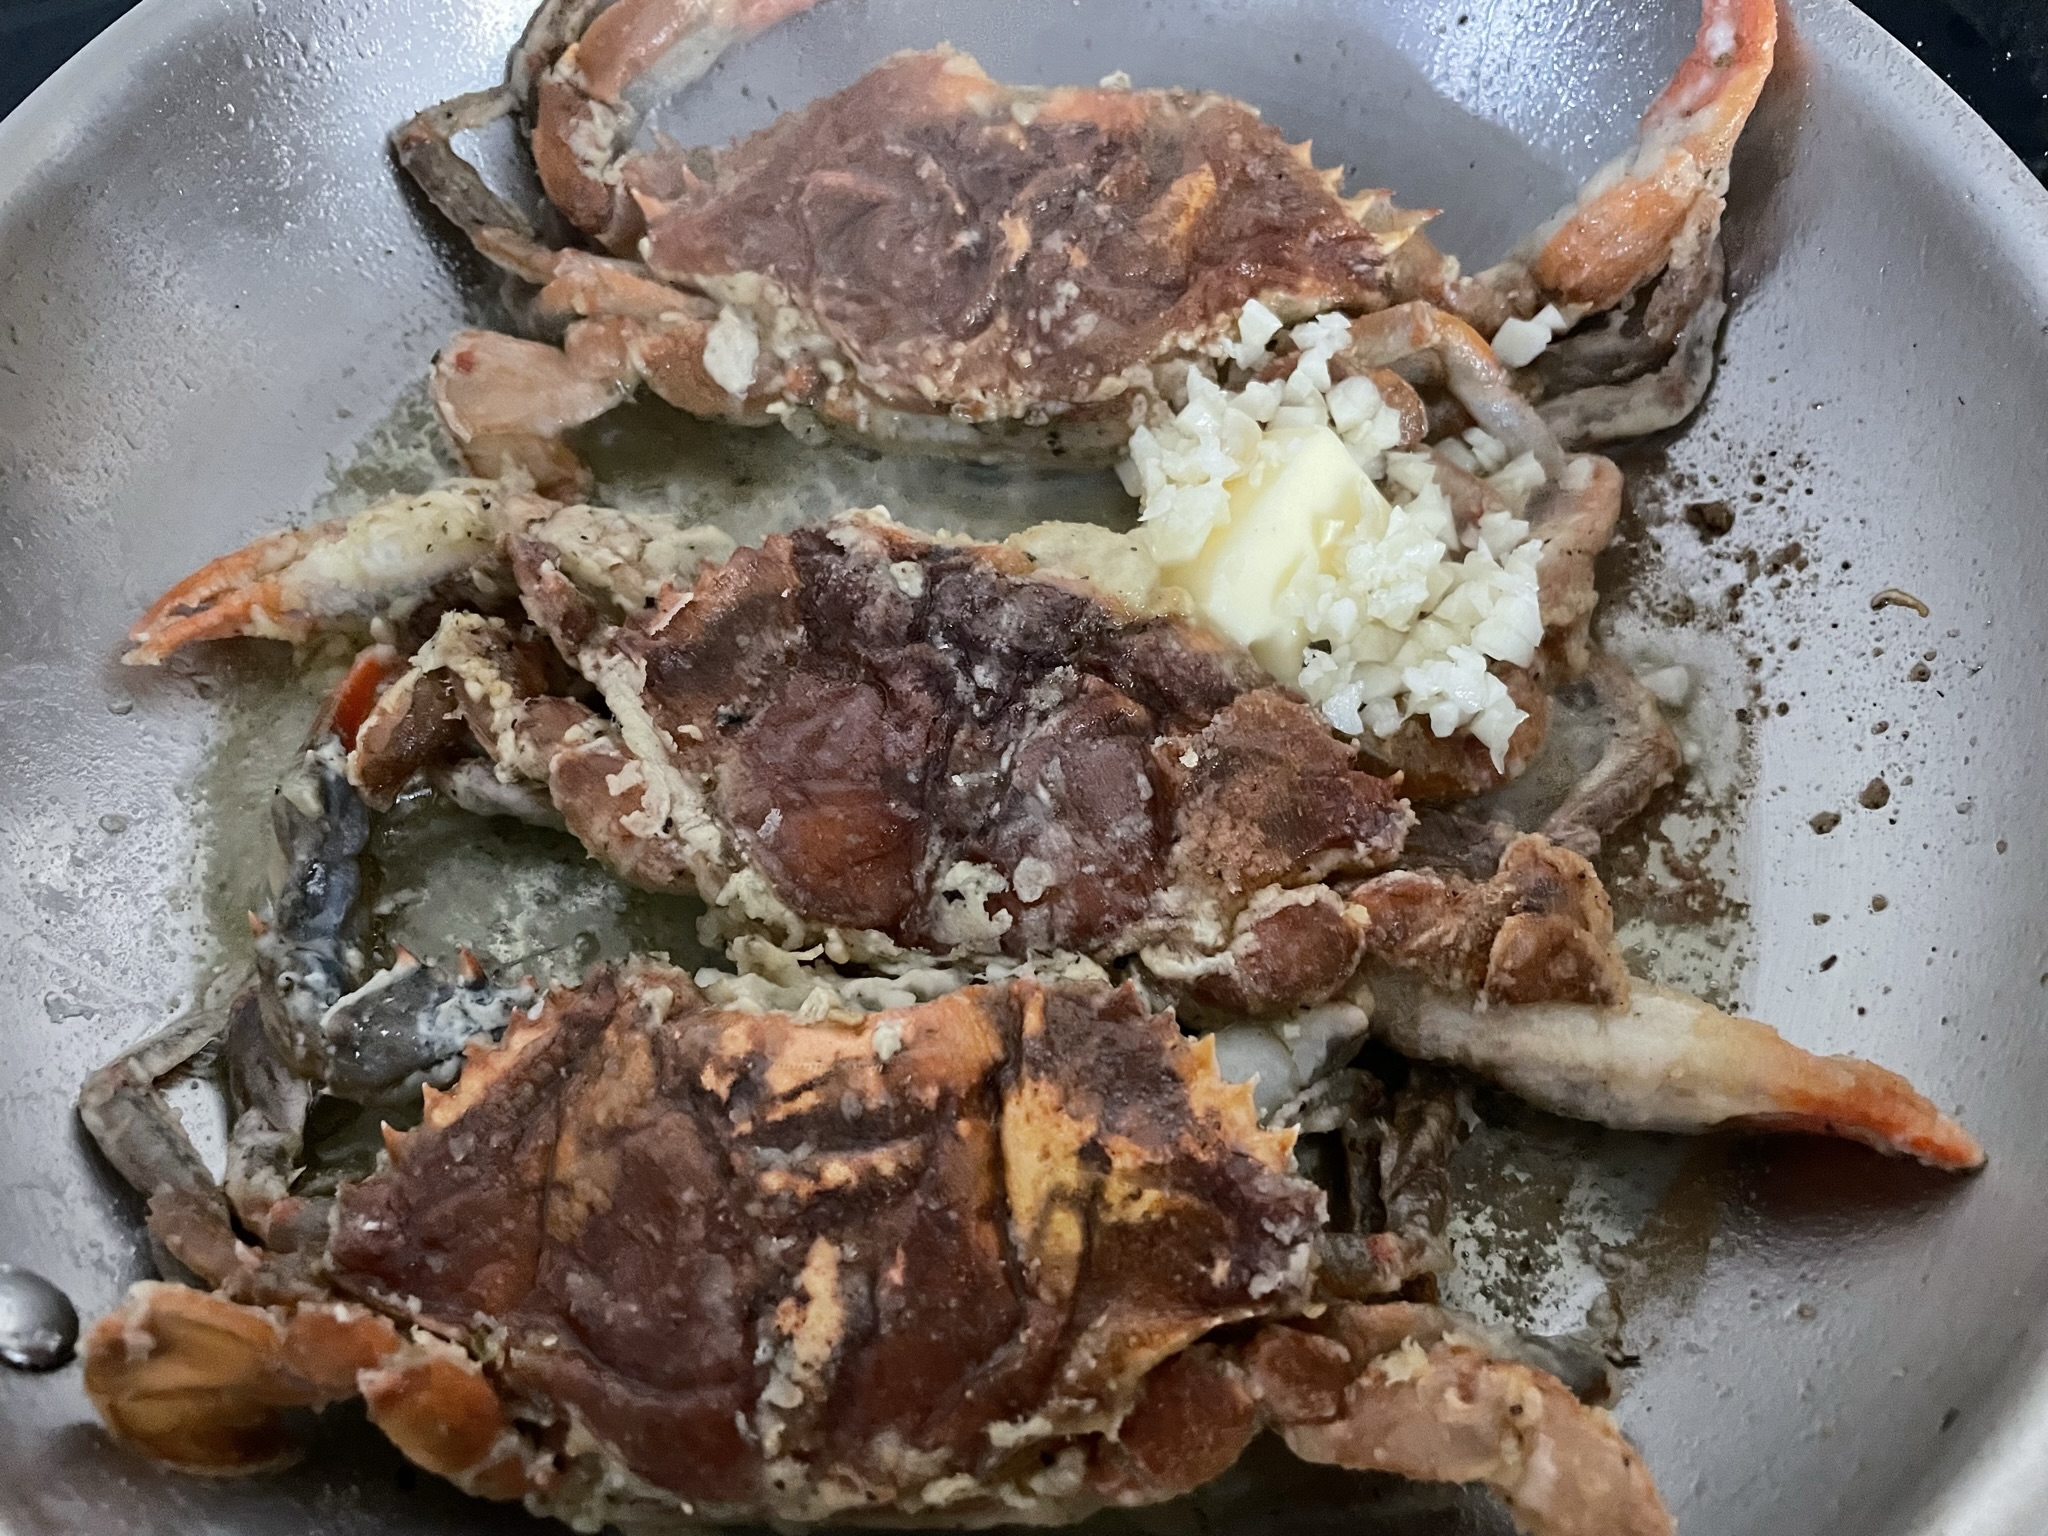 Add butter and chopped garlic after flipping the crabs.